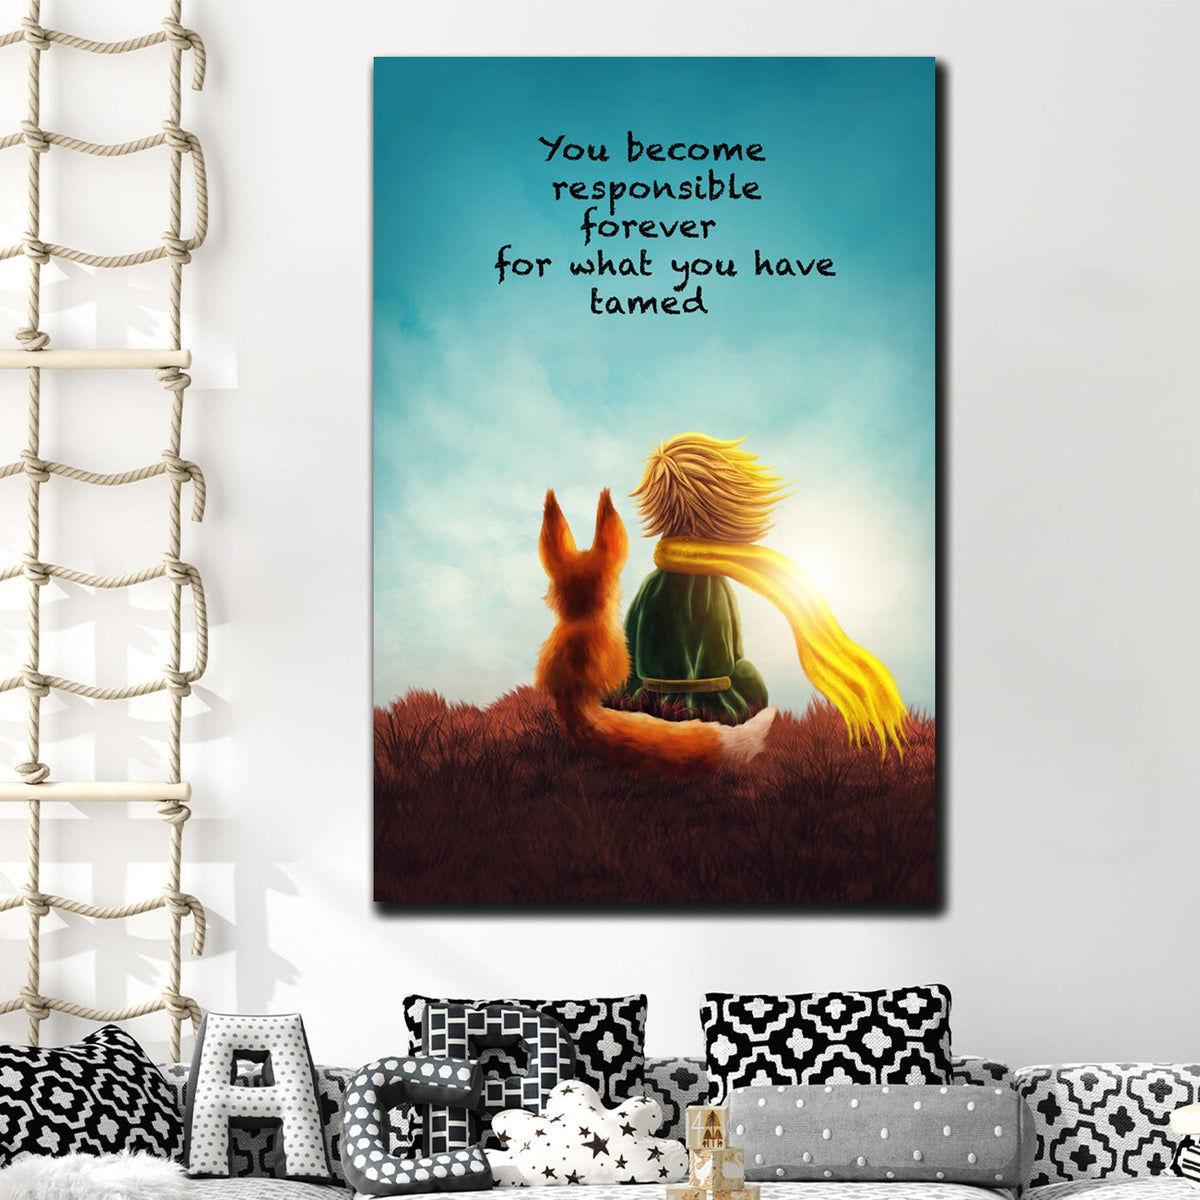 https://cdn.shopify.com/s/files/1/0387/9986/8044/products/TheFoxQuotefromTheLittlePrinceCanvasArtprintStretched-3.jpg